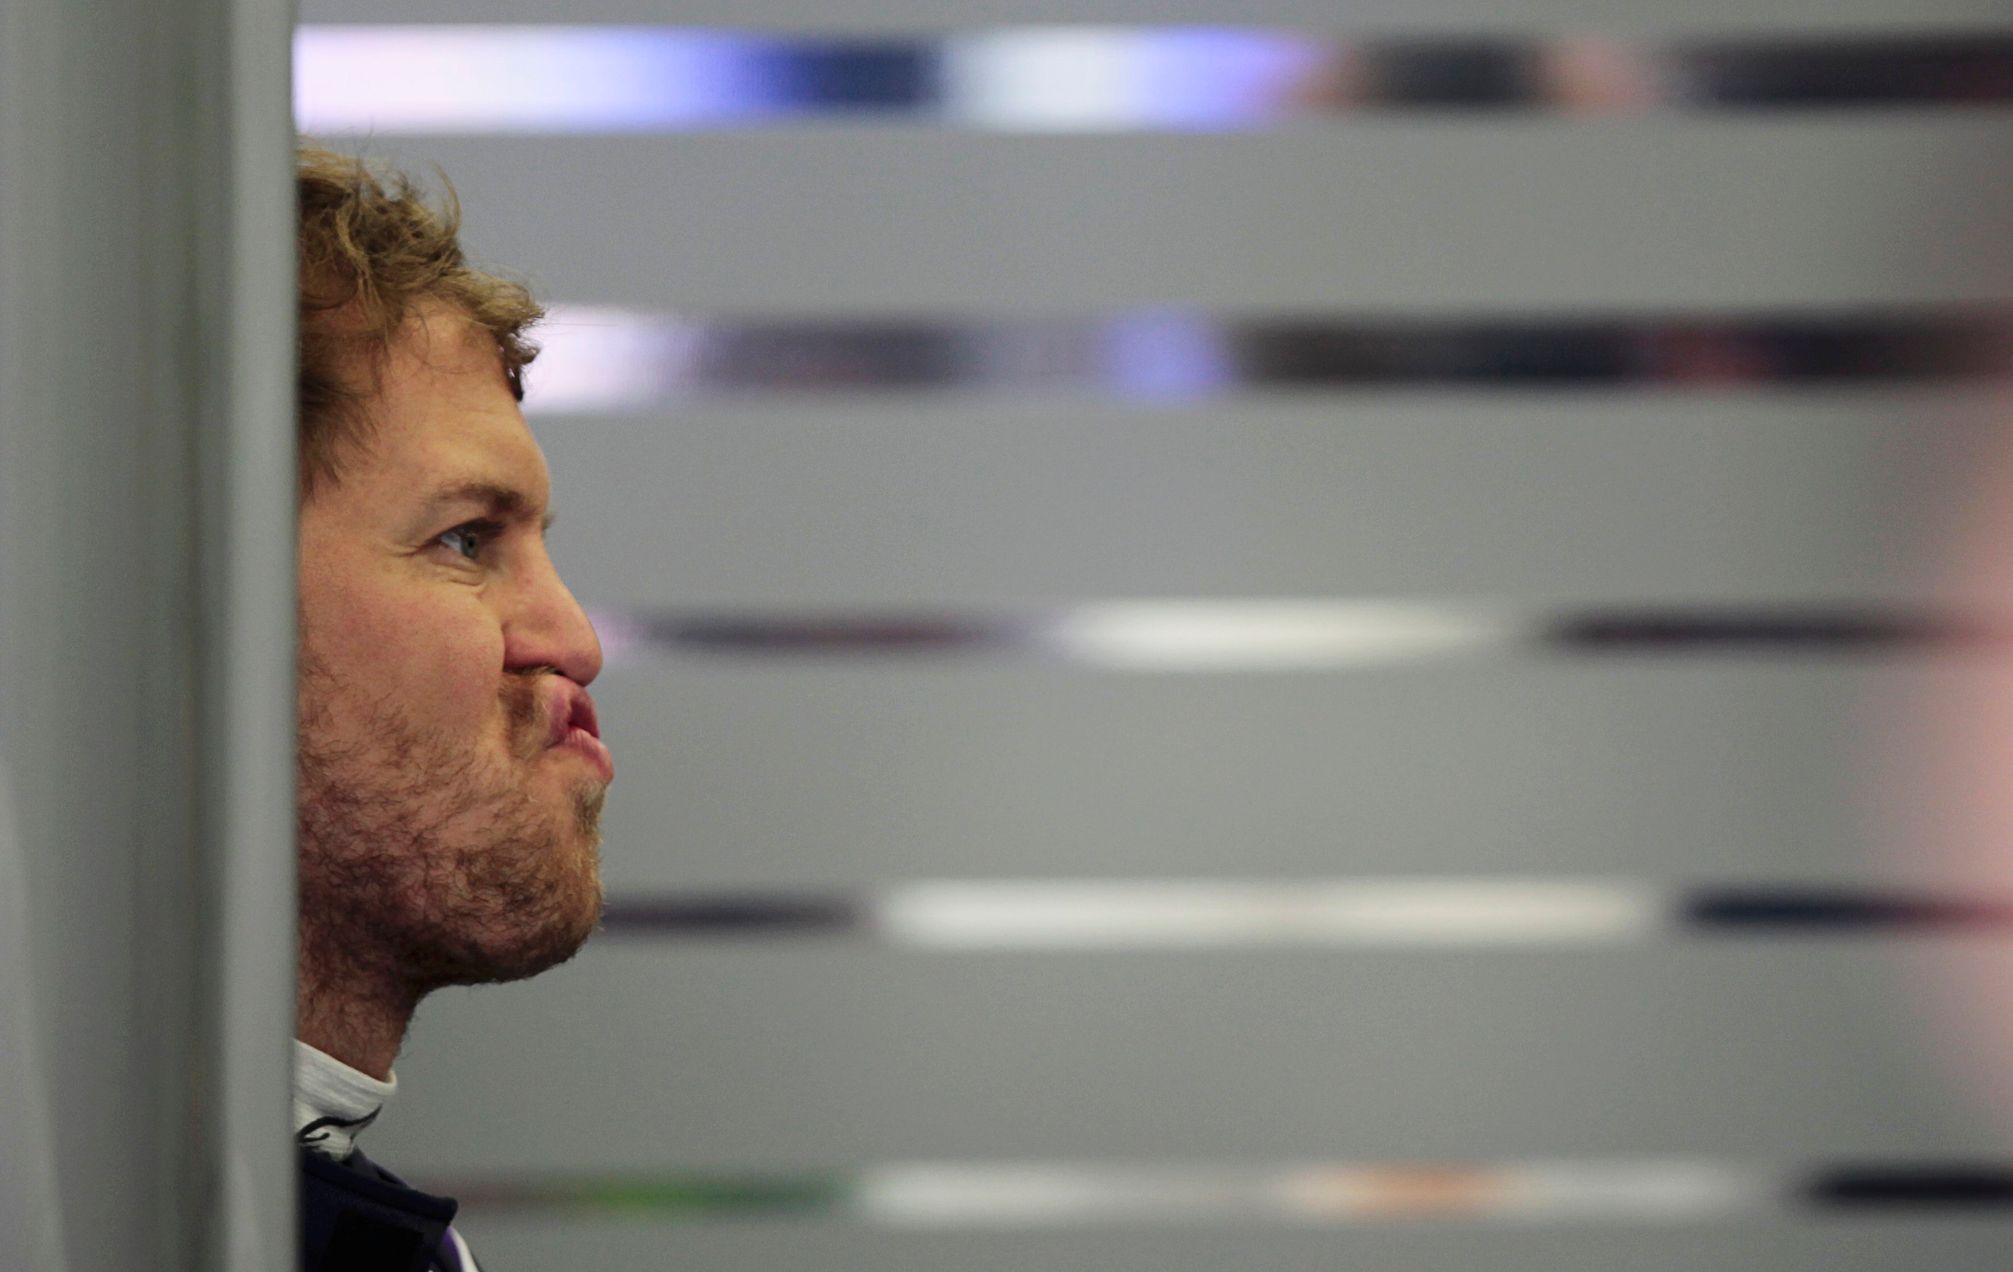 Red Bull Formula One driver Sebastian Vettel of Germany reacts during the first practice session of the Bahrain F1 Grand Prix at the Bahrain International Circuit (BIC) in Sakhir